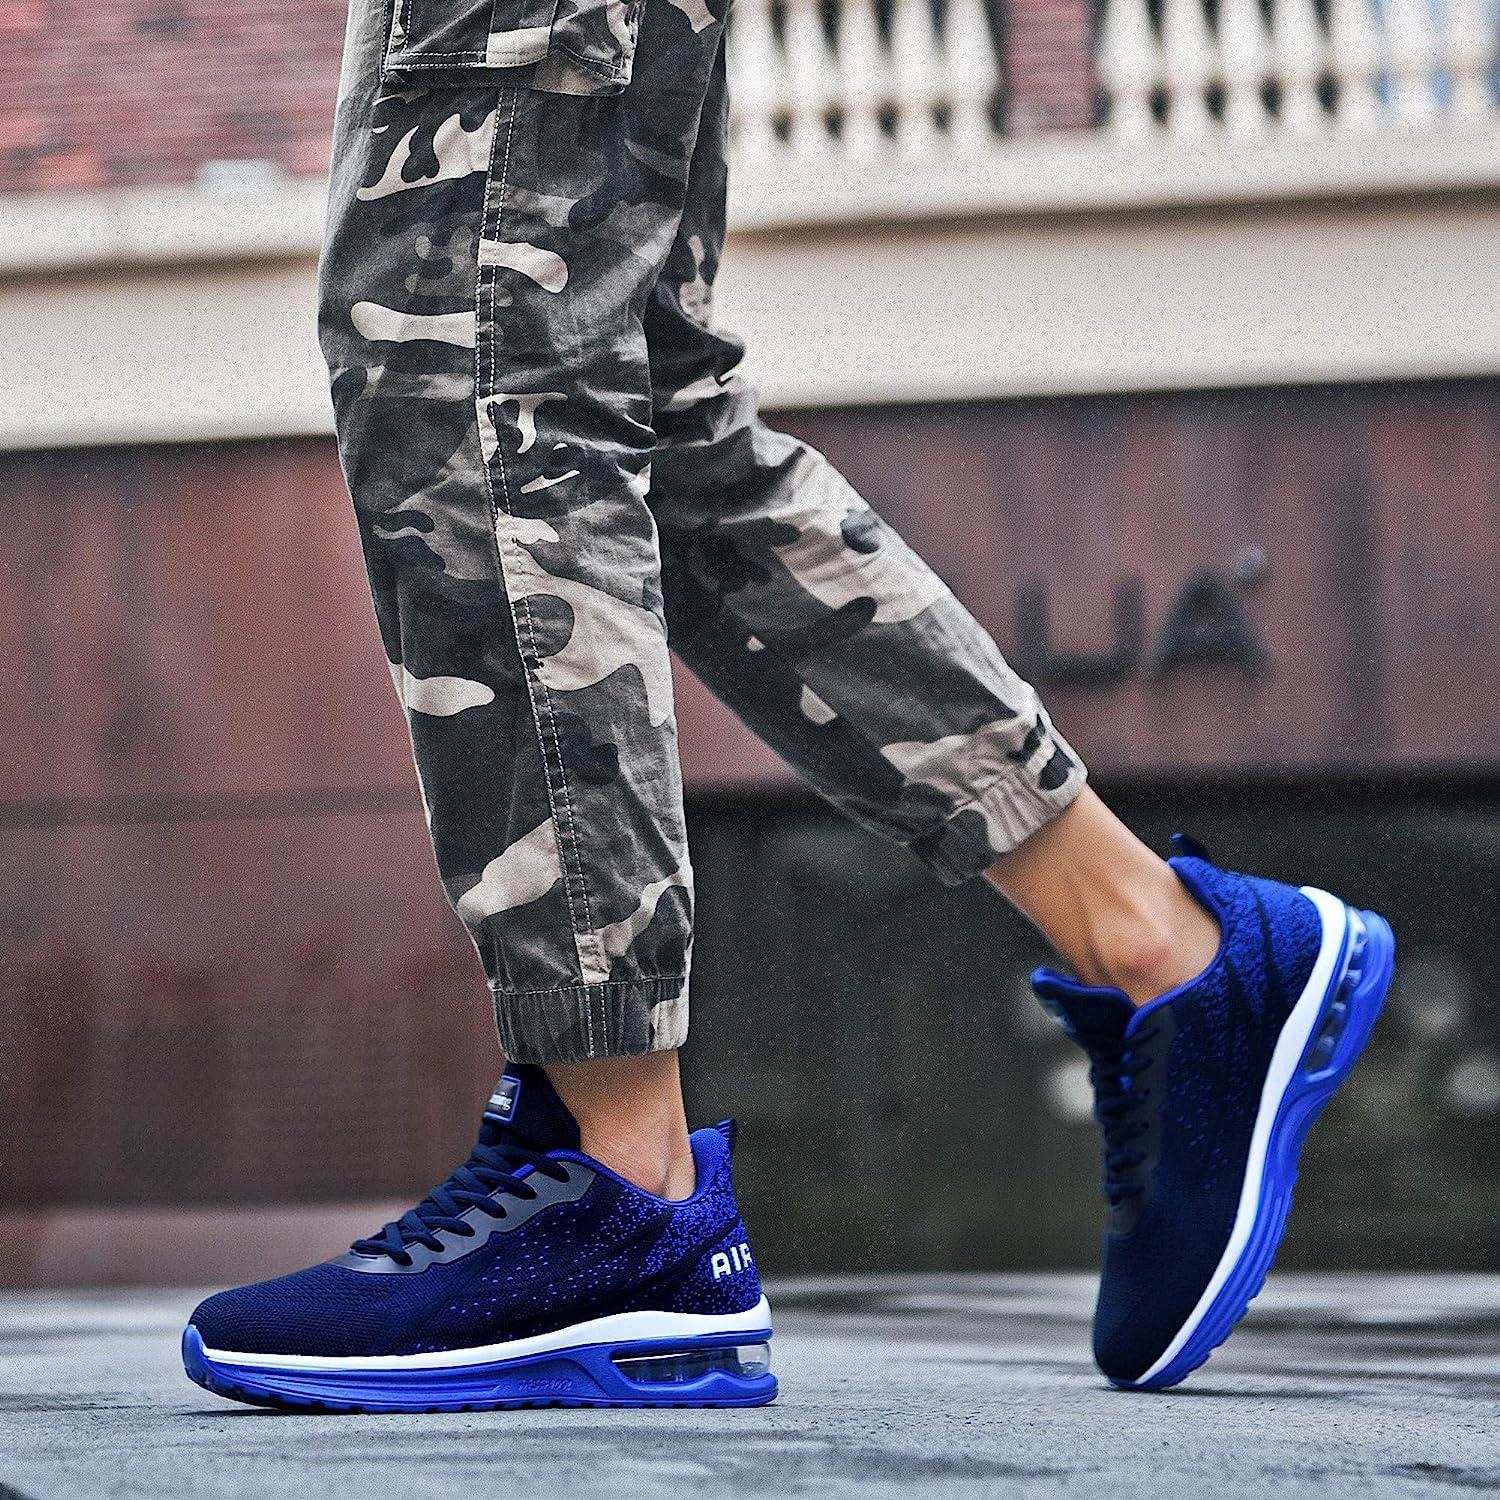 Mens sneakers · Running shoes · Tennis shoes